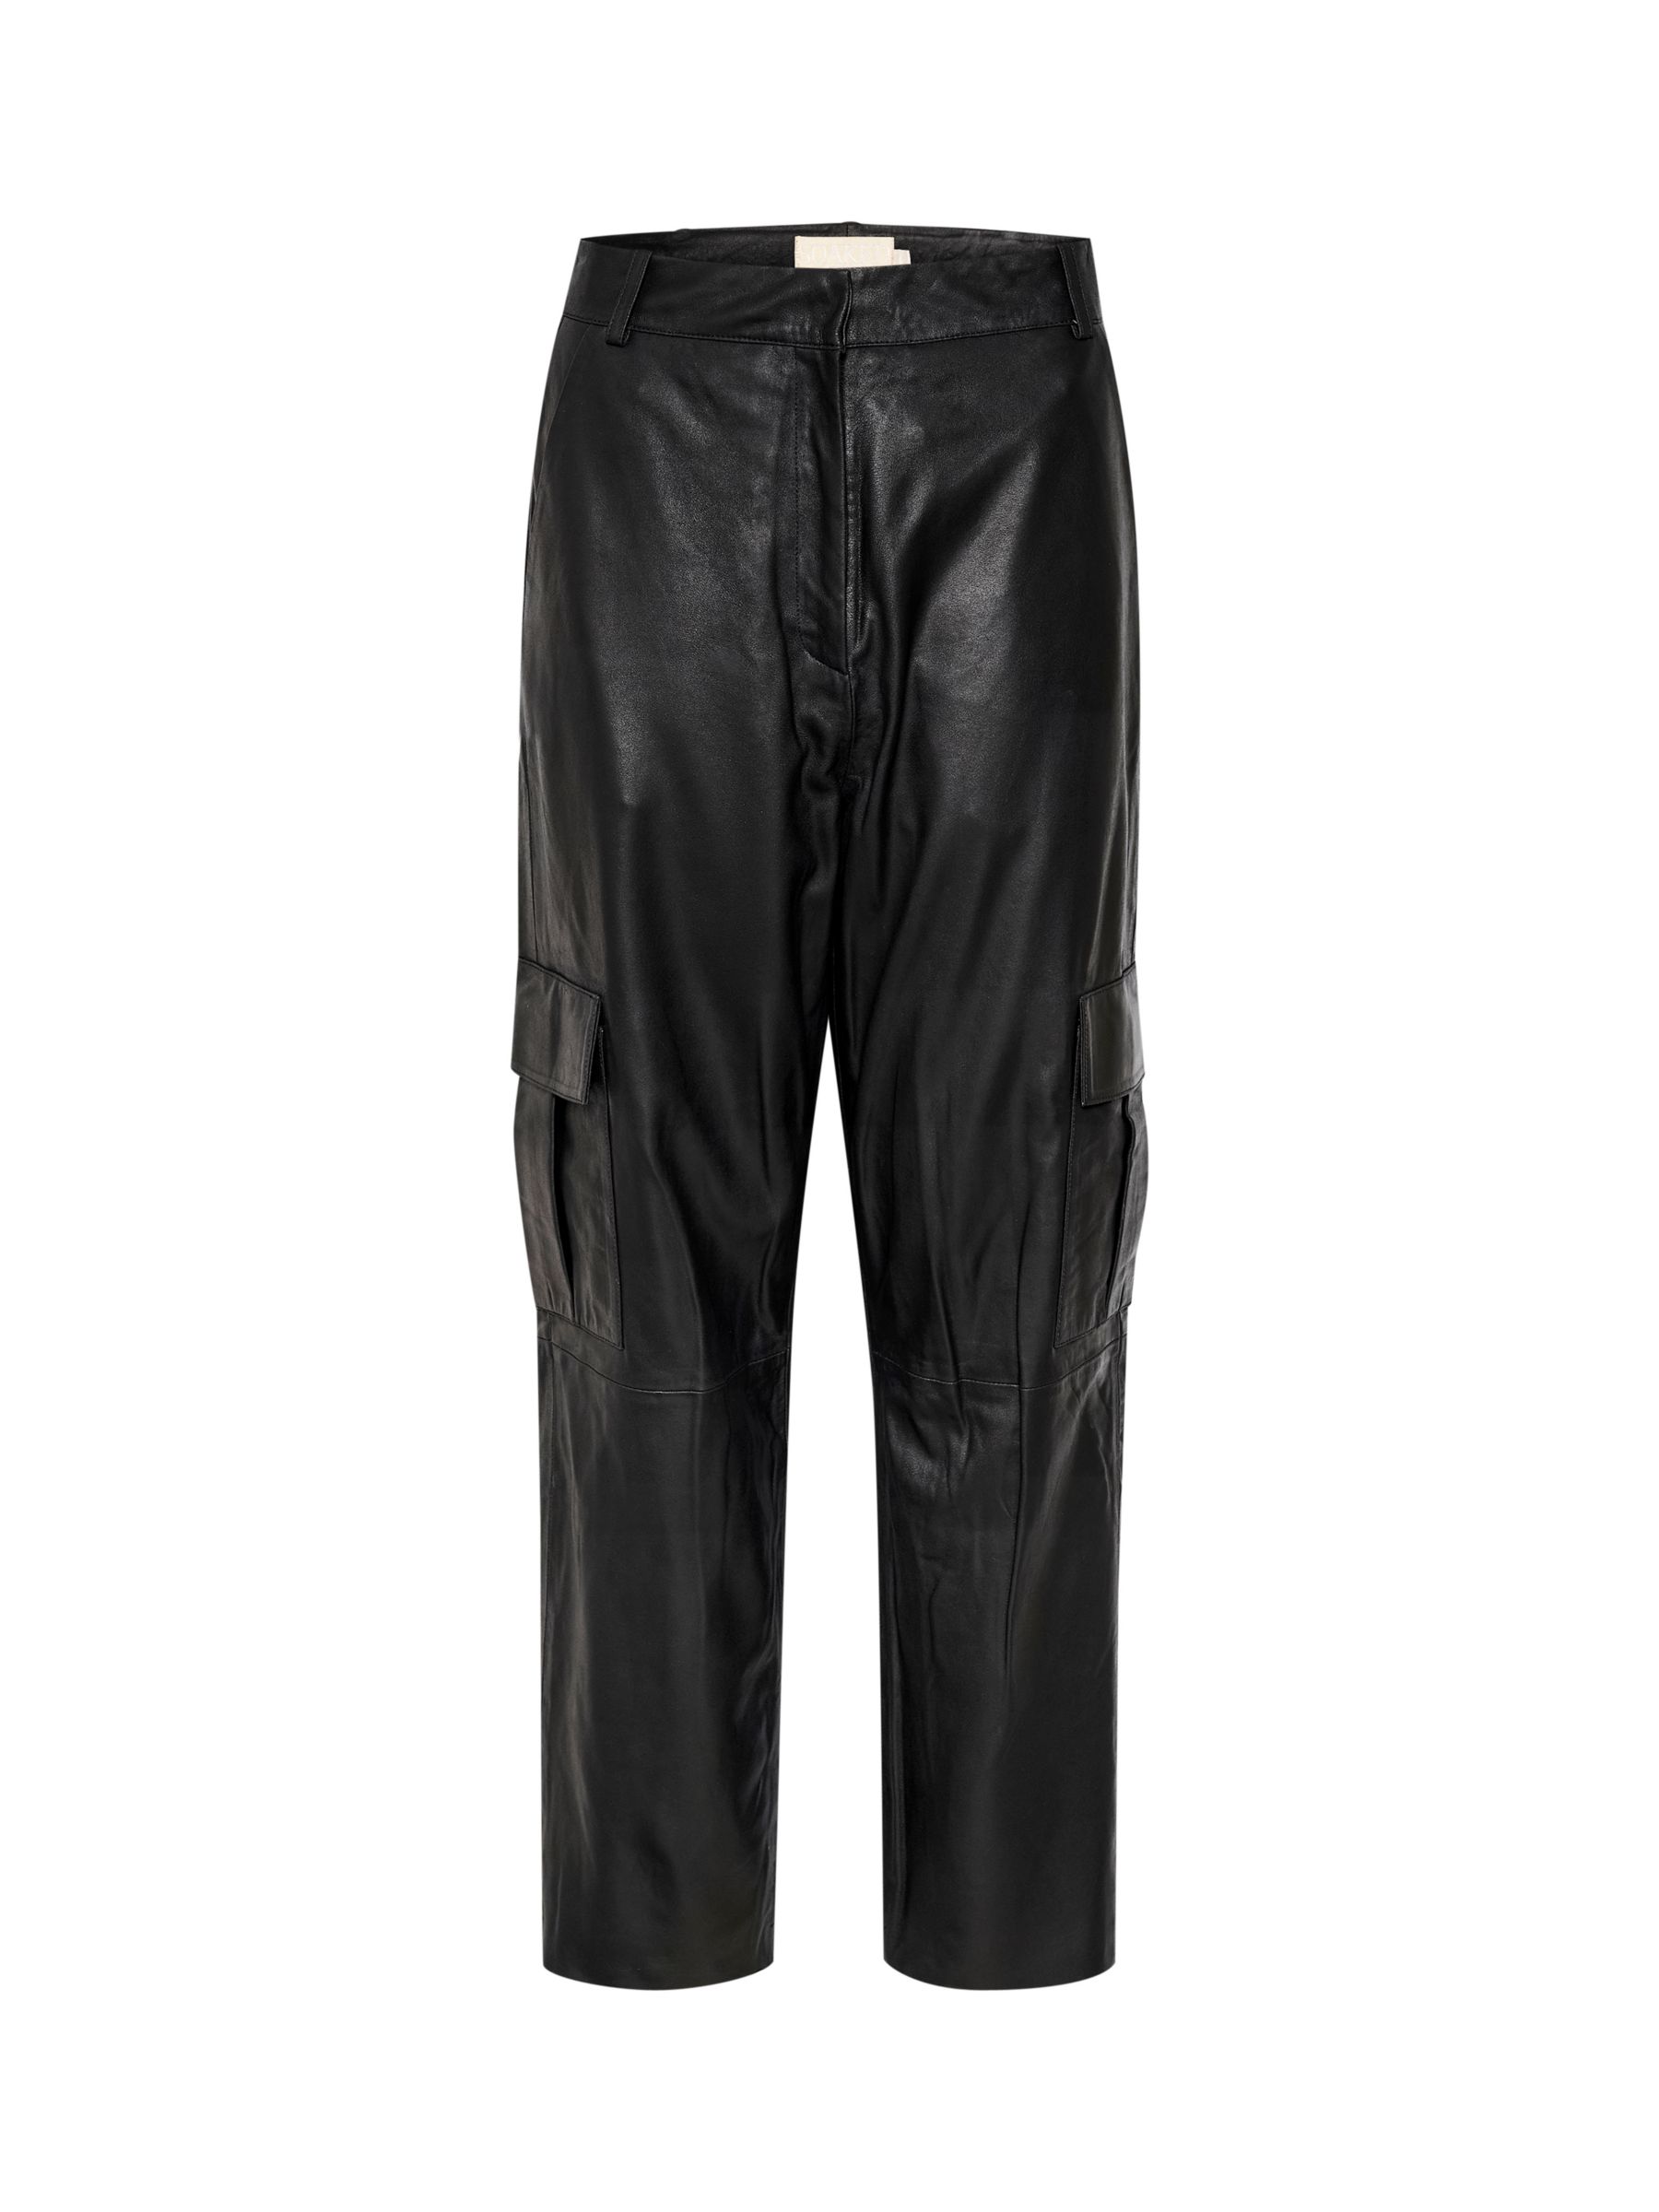 Buy Soaked In Luxury Joselyn Cargo Leather Trousers, Black Online at johnlewis.com